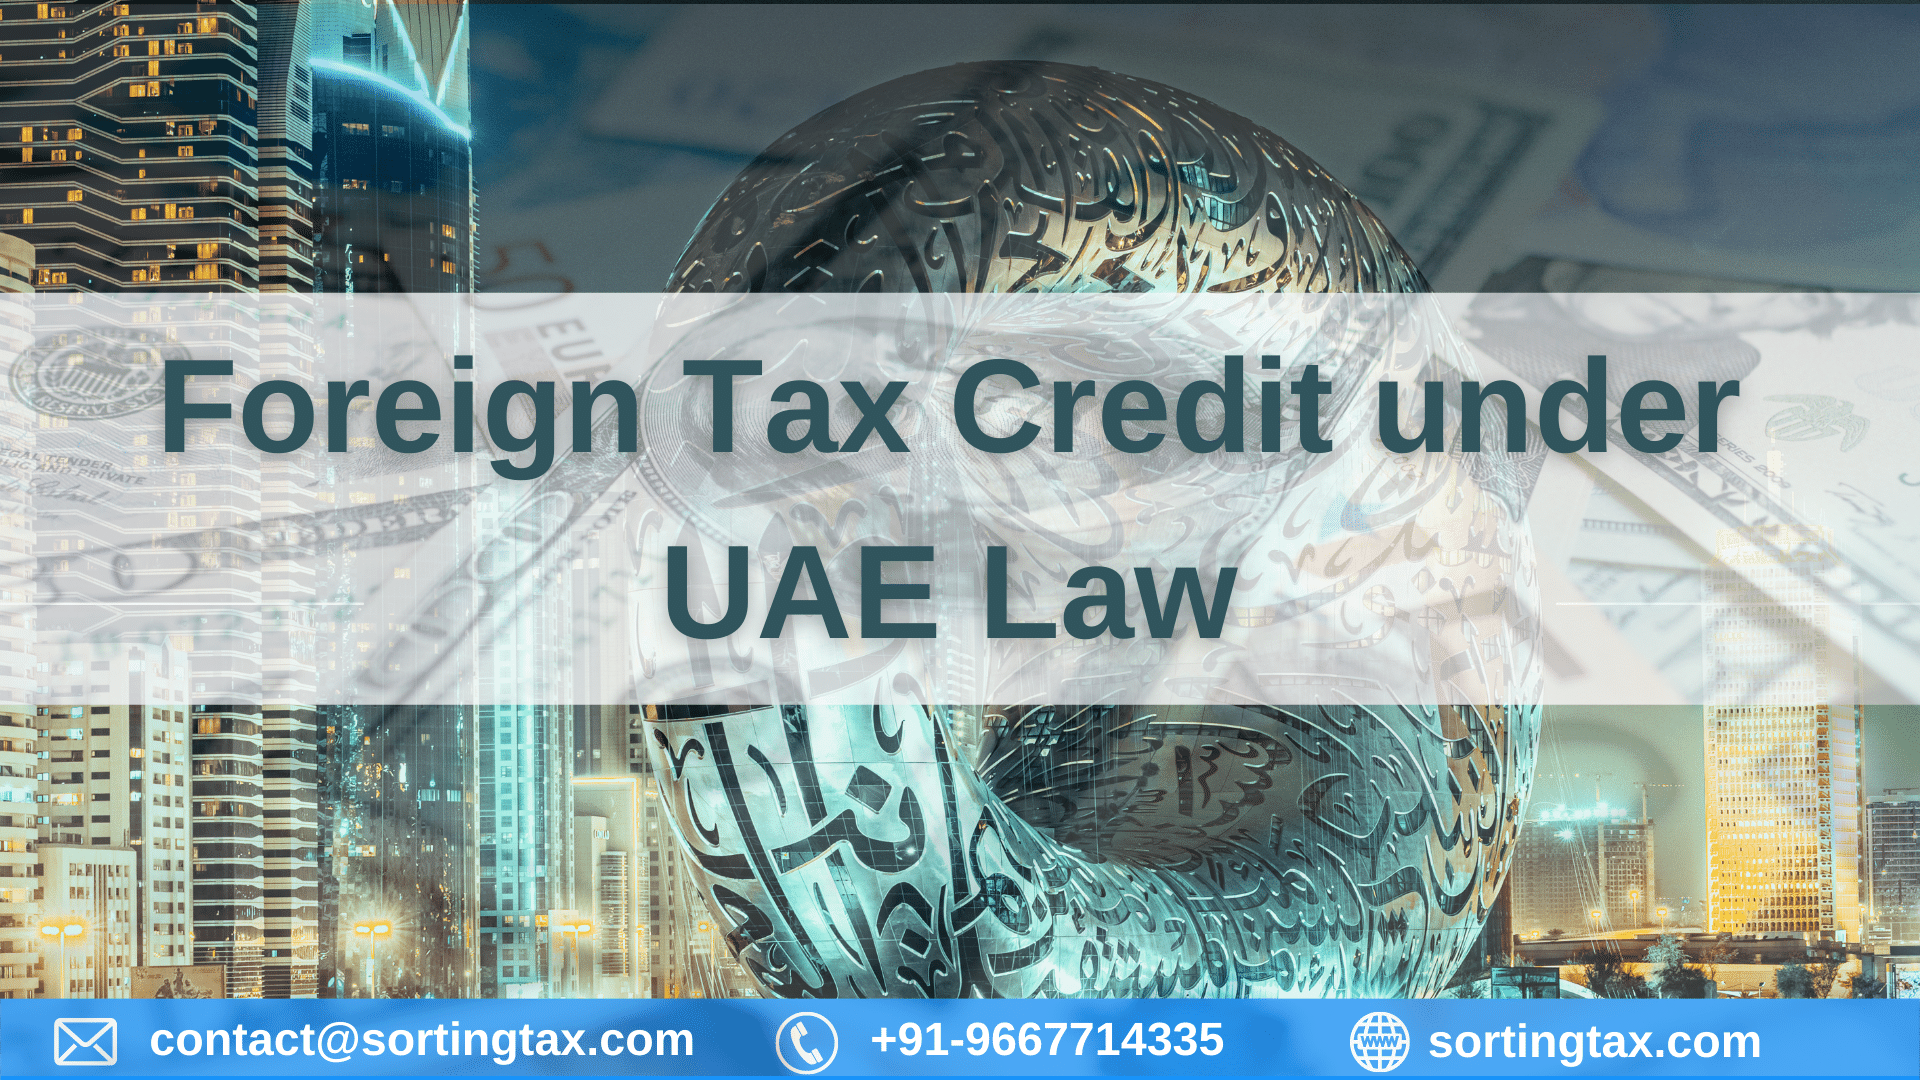 Foreign Tax Credit under UAE Law